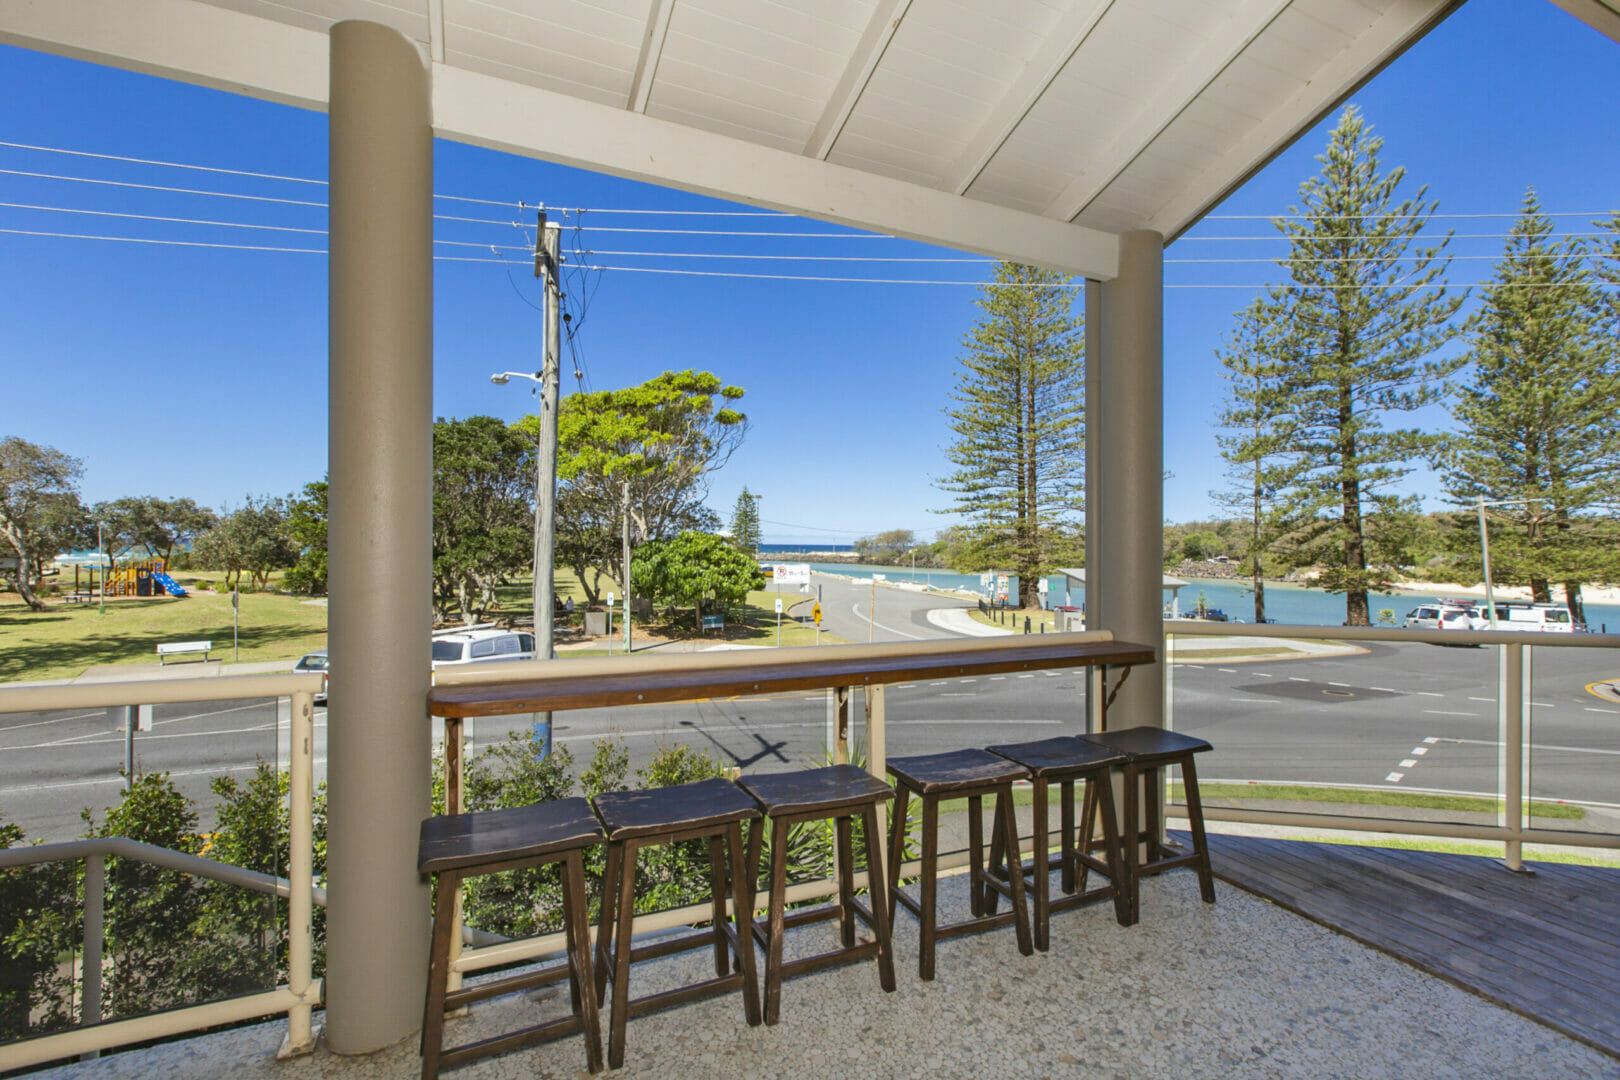 046_Open2view_ID662527-2_Marine_Parade__Kingscliff